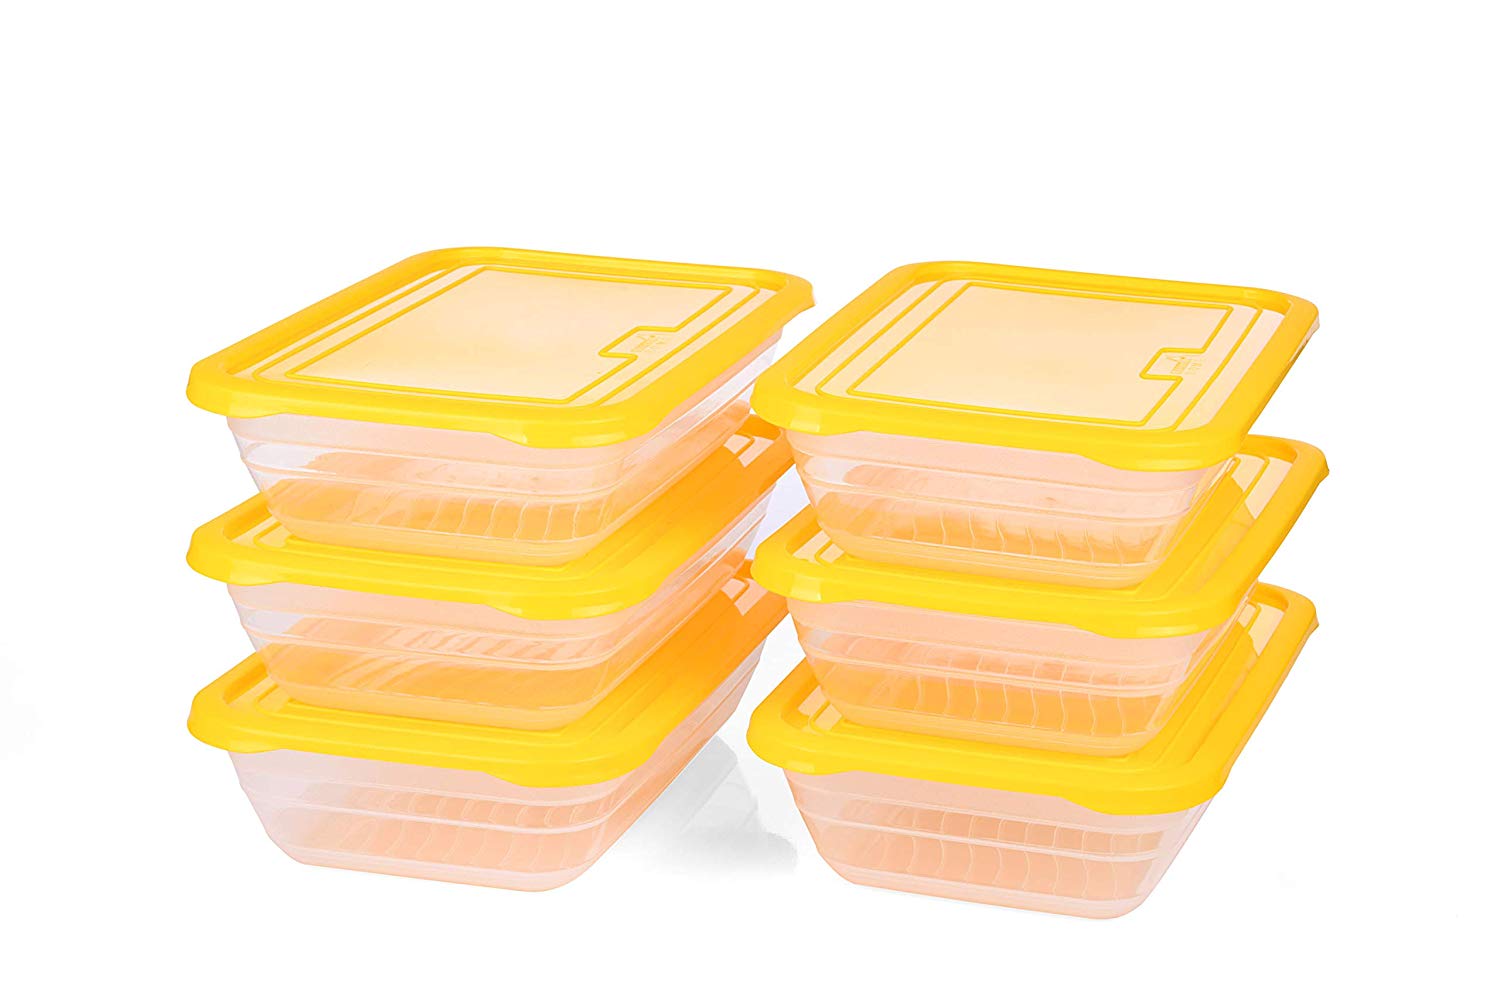 Small 3L Lunch Container